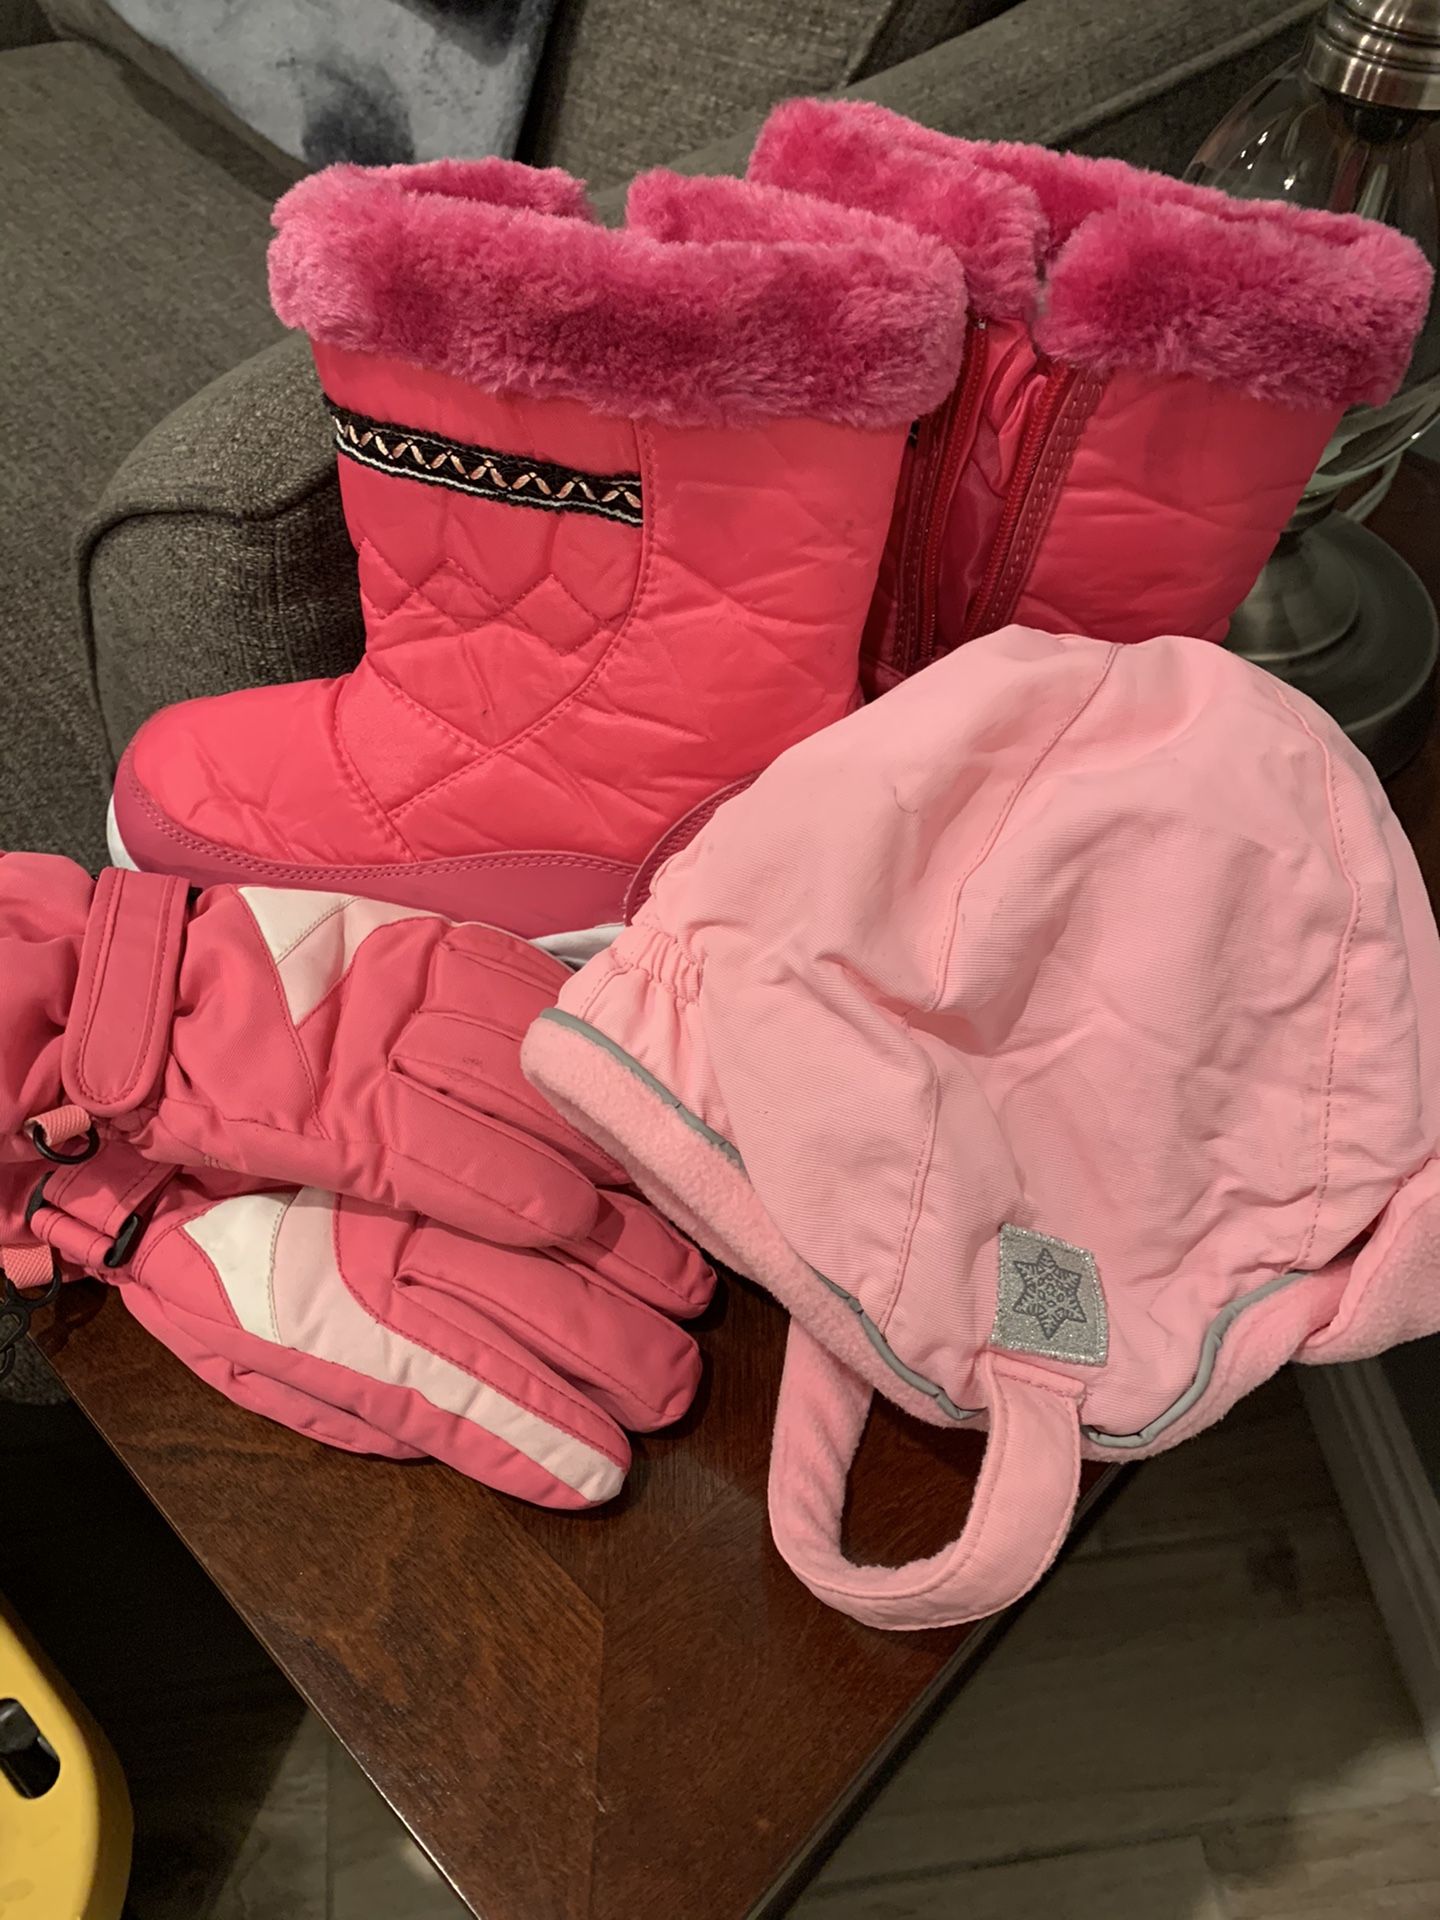 ❄️SNOW CLOTHES❄️ for a little girl!